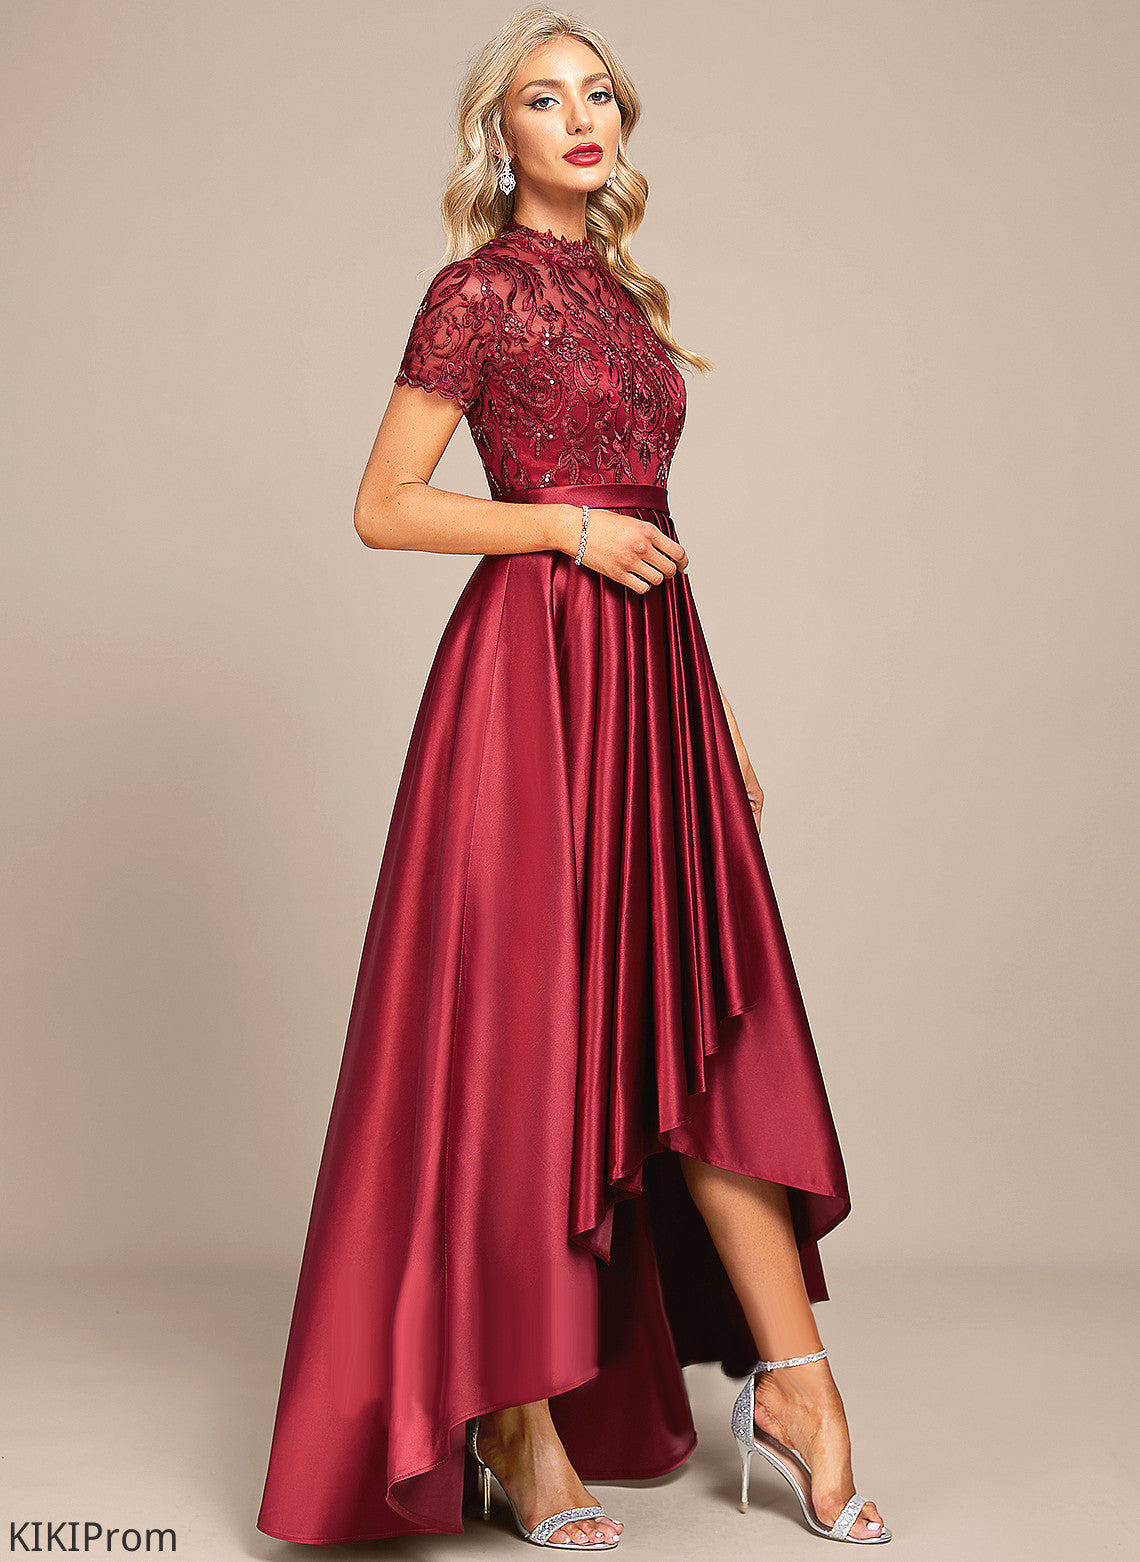 Satin A-Line Lace Cocktail Dresses Dress With Cocktail Sequins Ruffle Asymmetrical Maeve High Neck